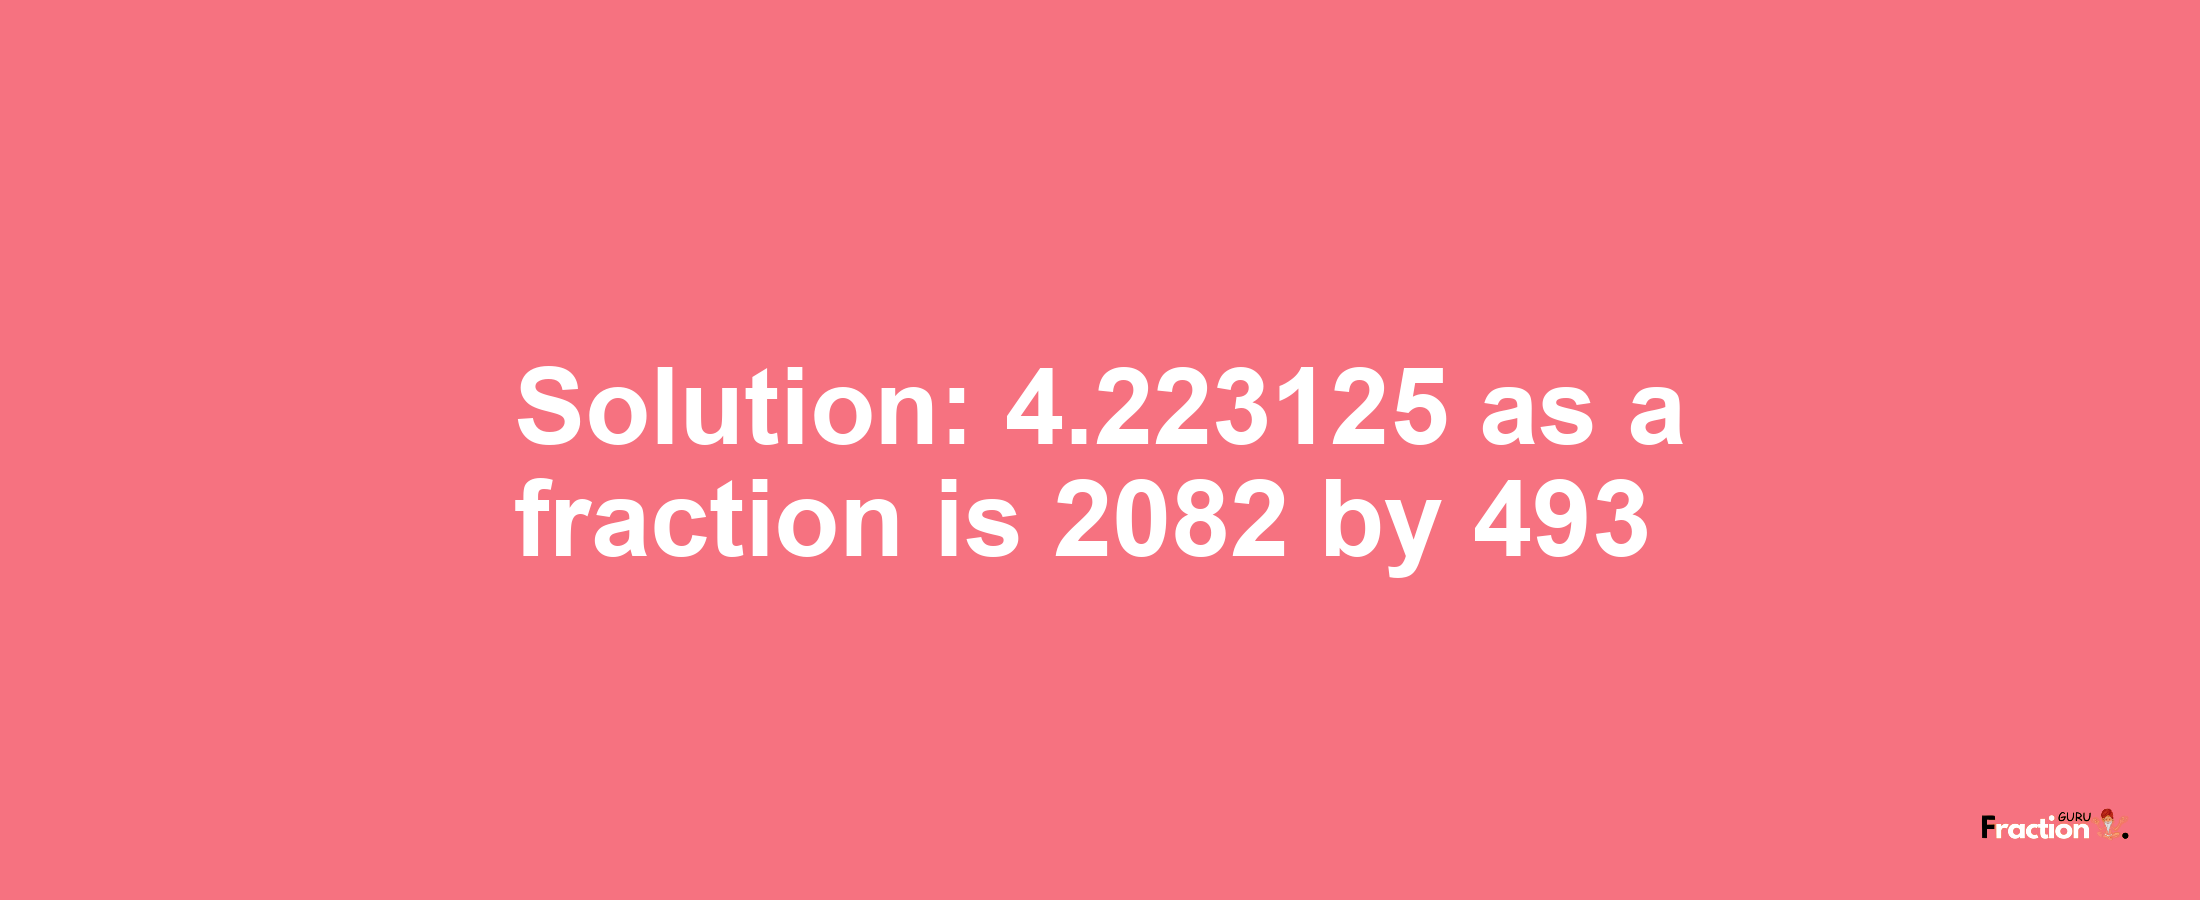 Solution:4.223125 as a fraction is 2082/493